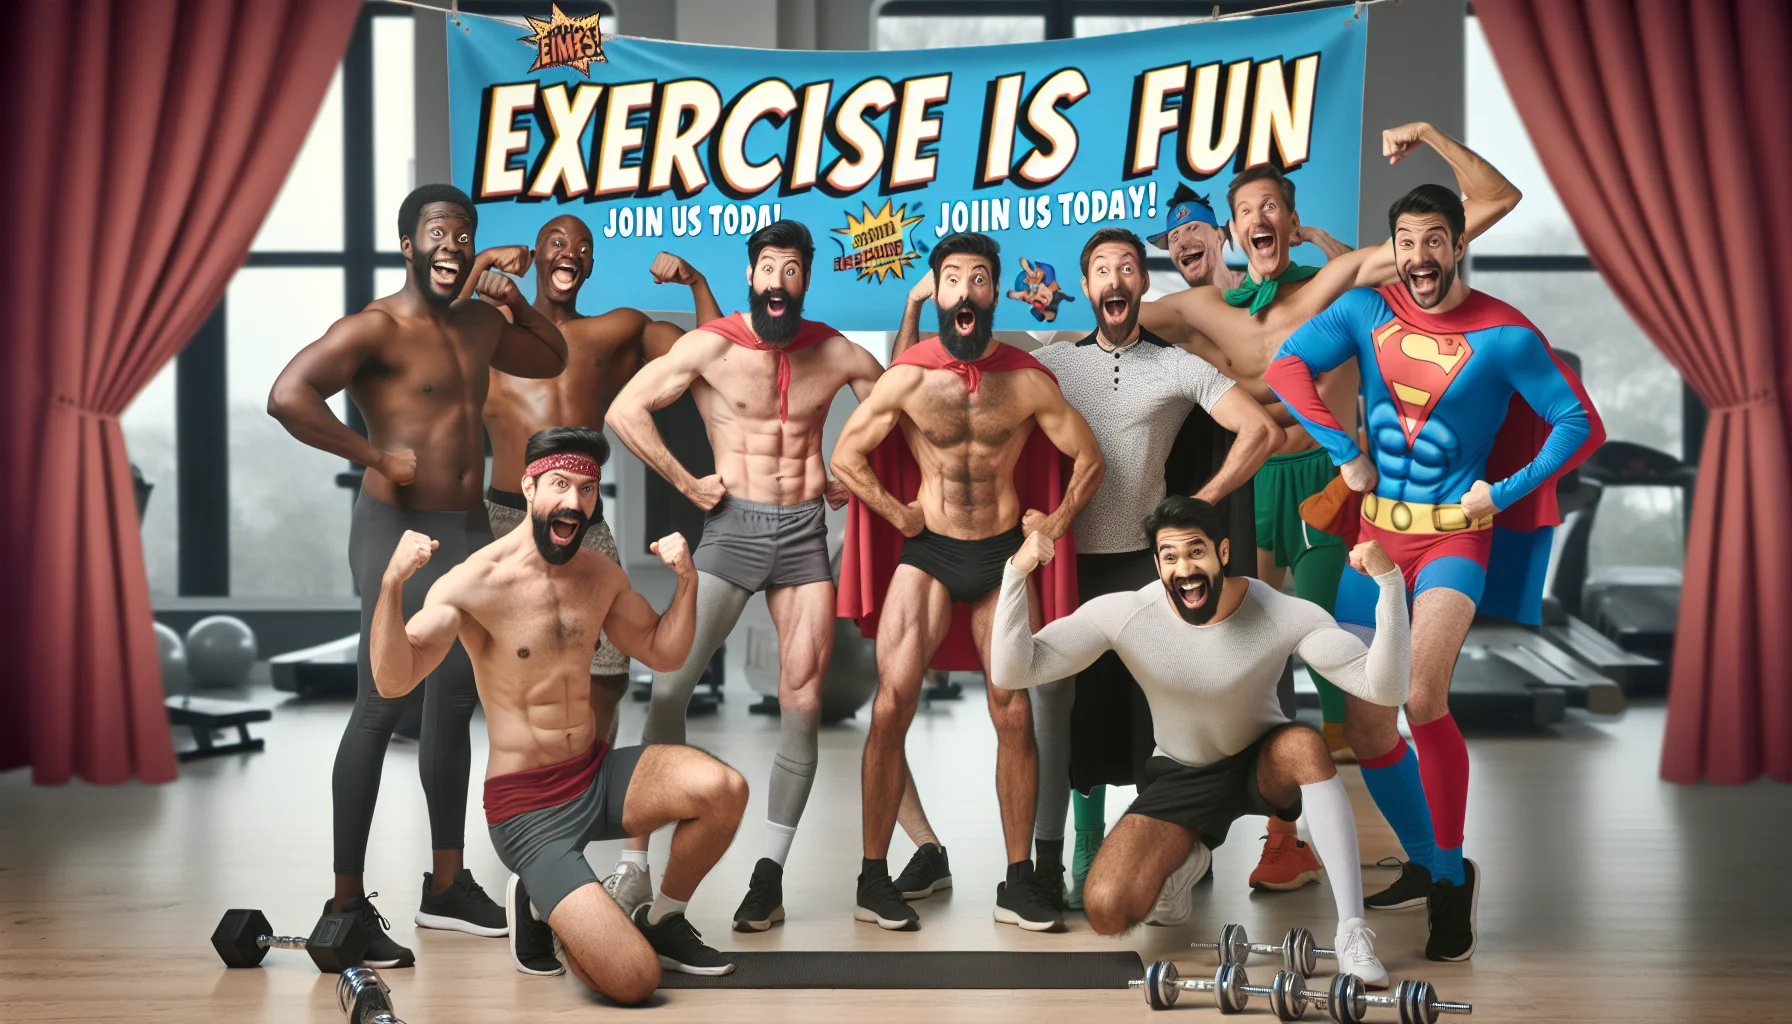 Create a humorous and enticing image that encourages a love for exercise. Picture a multicultural group of men, each of different descents including Caucasian, Hispanic, Black, Middle-Eastern, and South Asian, displaying the results of their body sculpting and fitness efforts. They are striking hilariously exaggerated superhero poses, demonstrating that exercise can be joyful and health-enhancing, not just hard work. Their clothes are loose gym outfits, and a variety of gym equipment is scattered around them. The backdrop is a bright, cheerful gym setting. In the foreground, a banner reads 'Exercise is fun - join us today!'